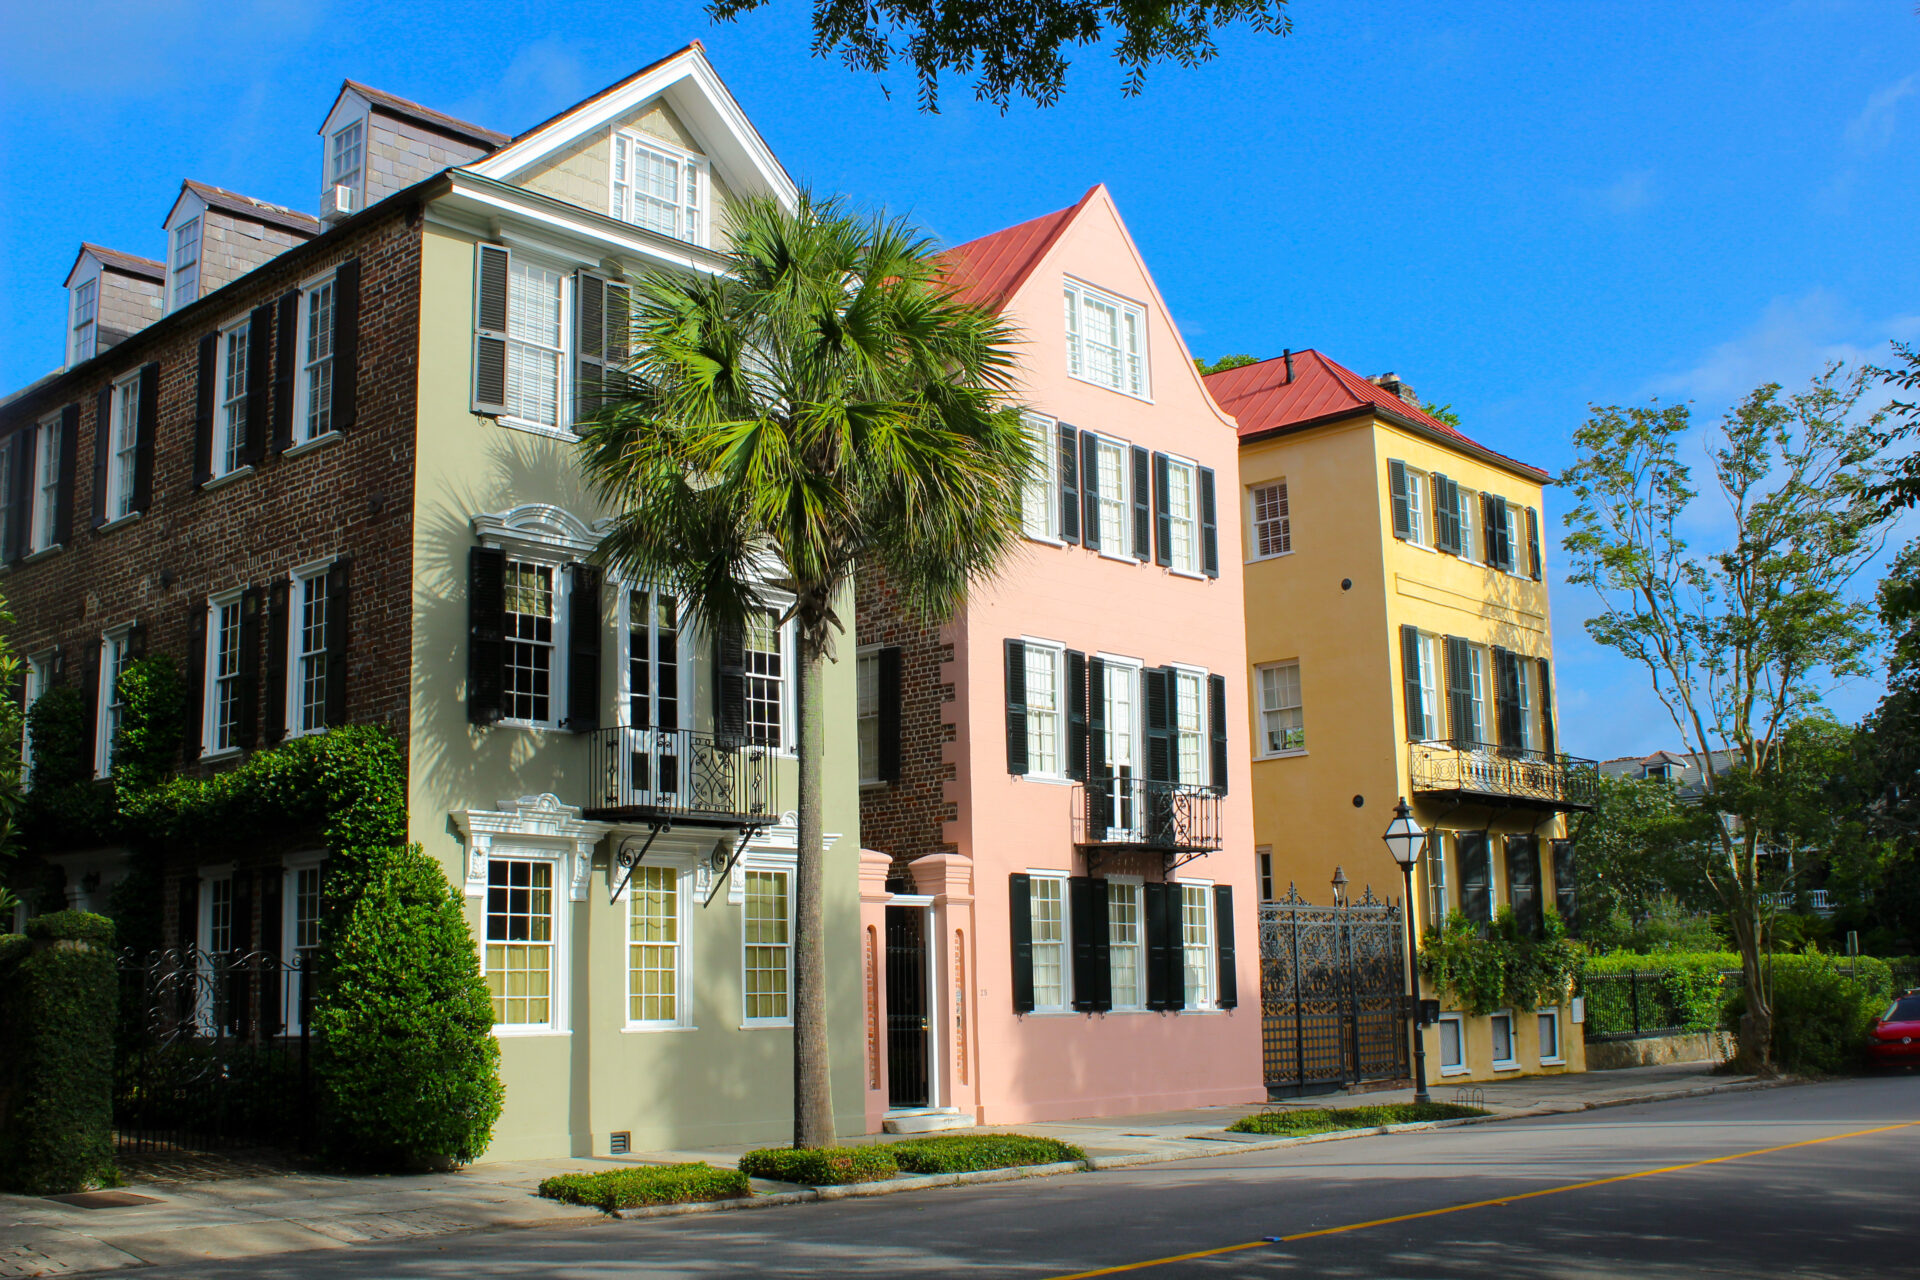 Downtown Charleston houses with yellow, pink, and green exteriors